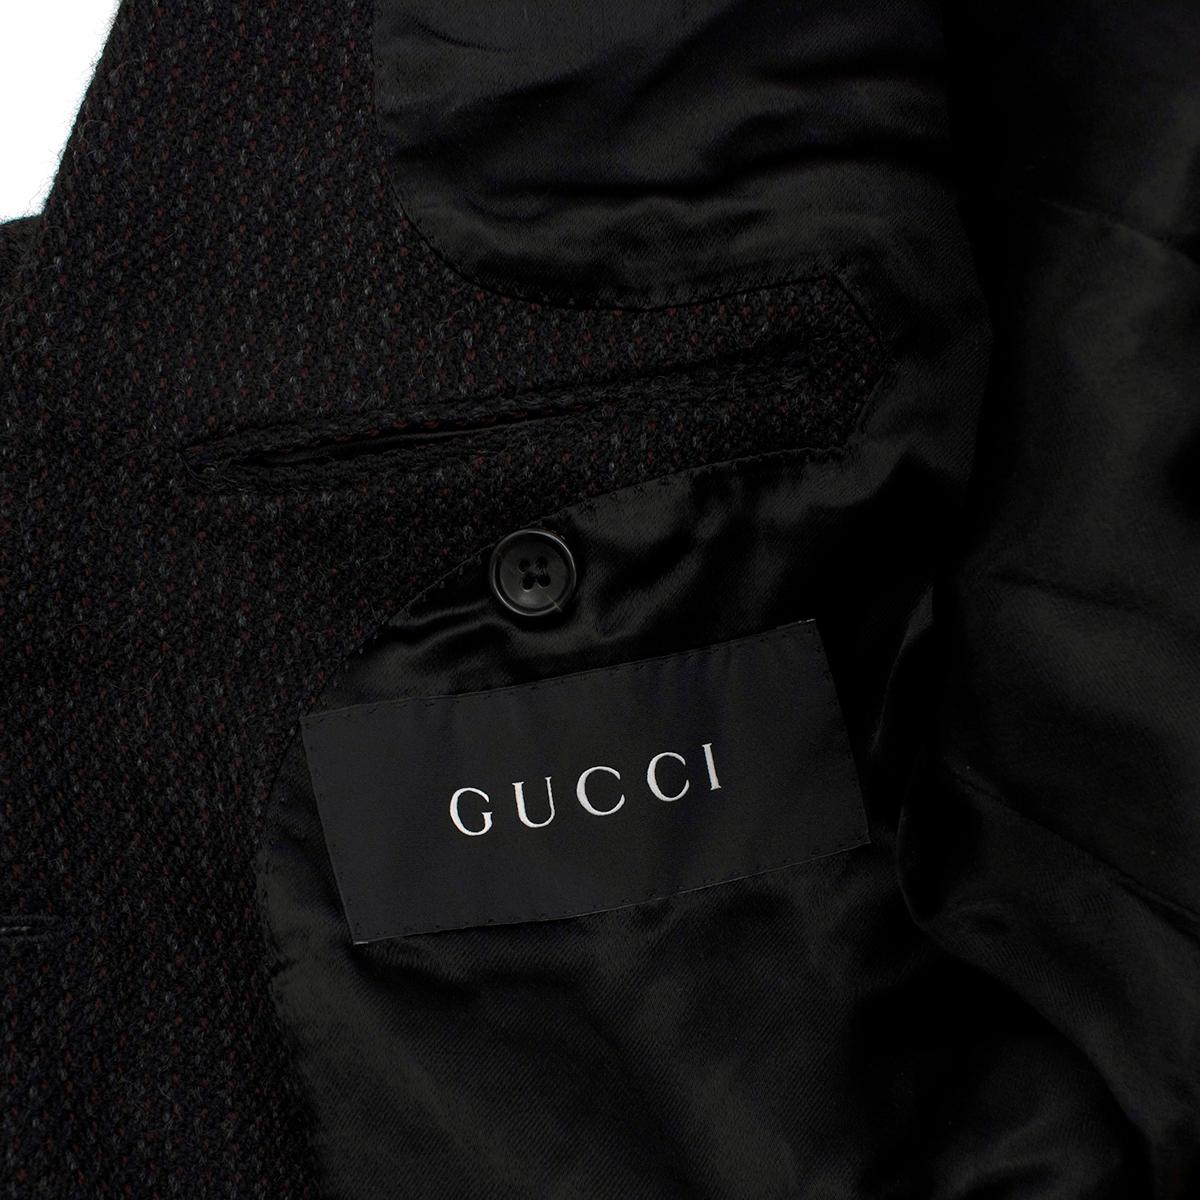 Gucci Black & Red Wool Double Breasted Coat - Us size 6 For Sale 2